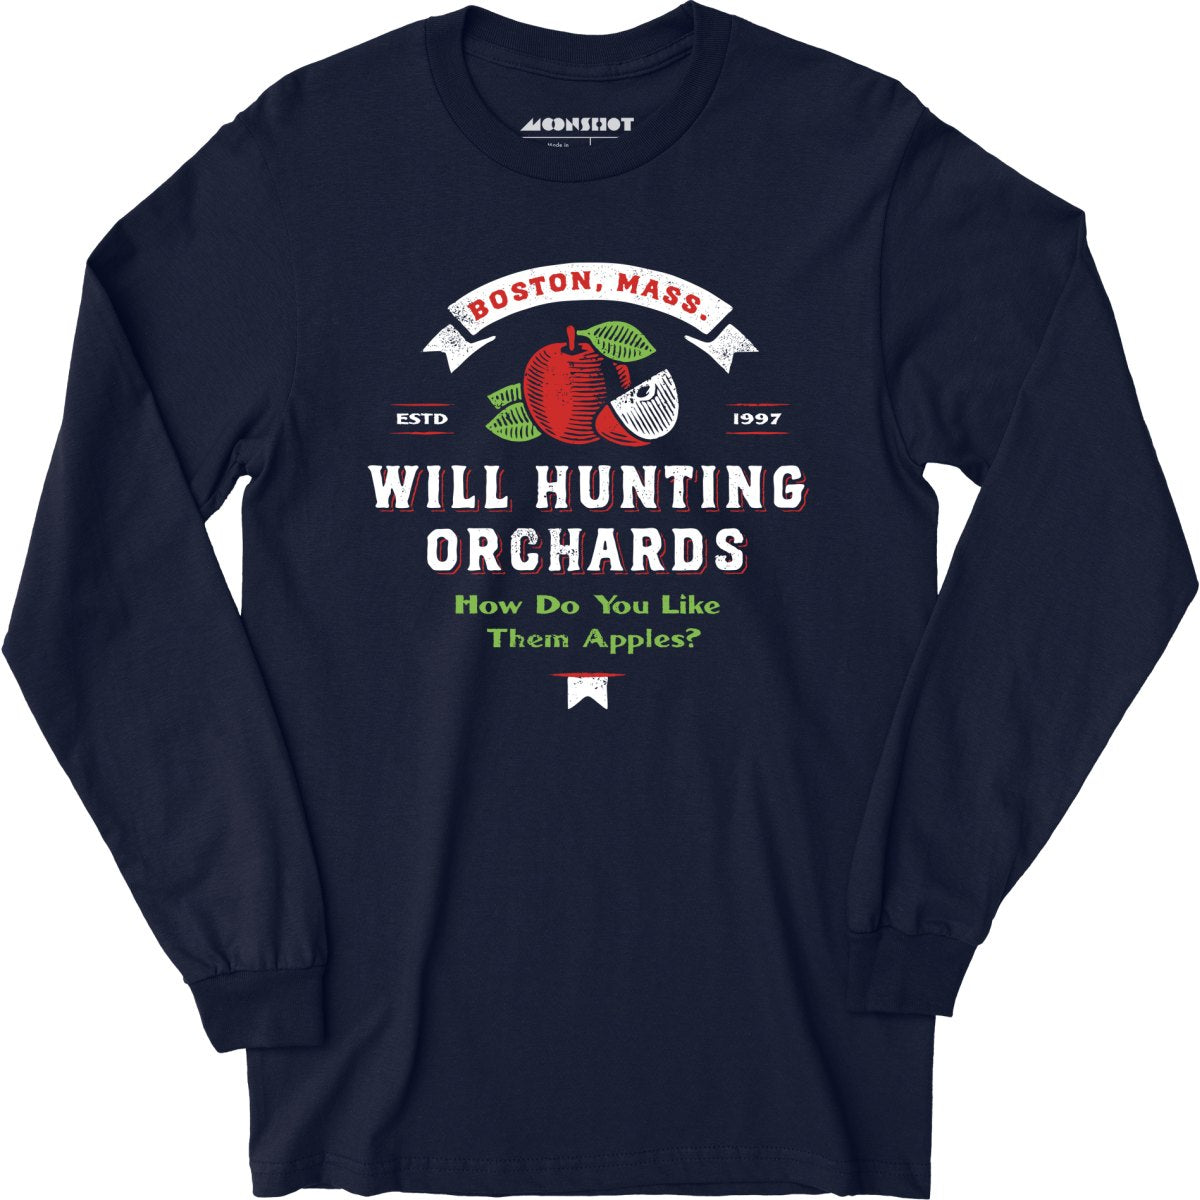 Will Hunting Orchards - Long Sleeve T-Shirt